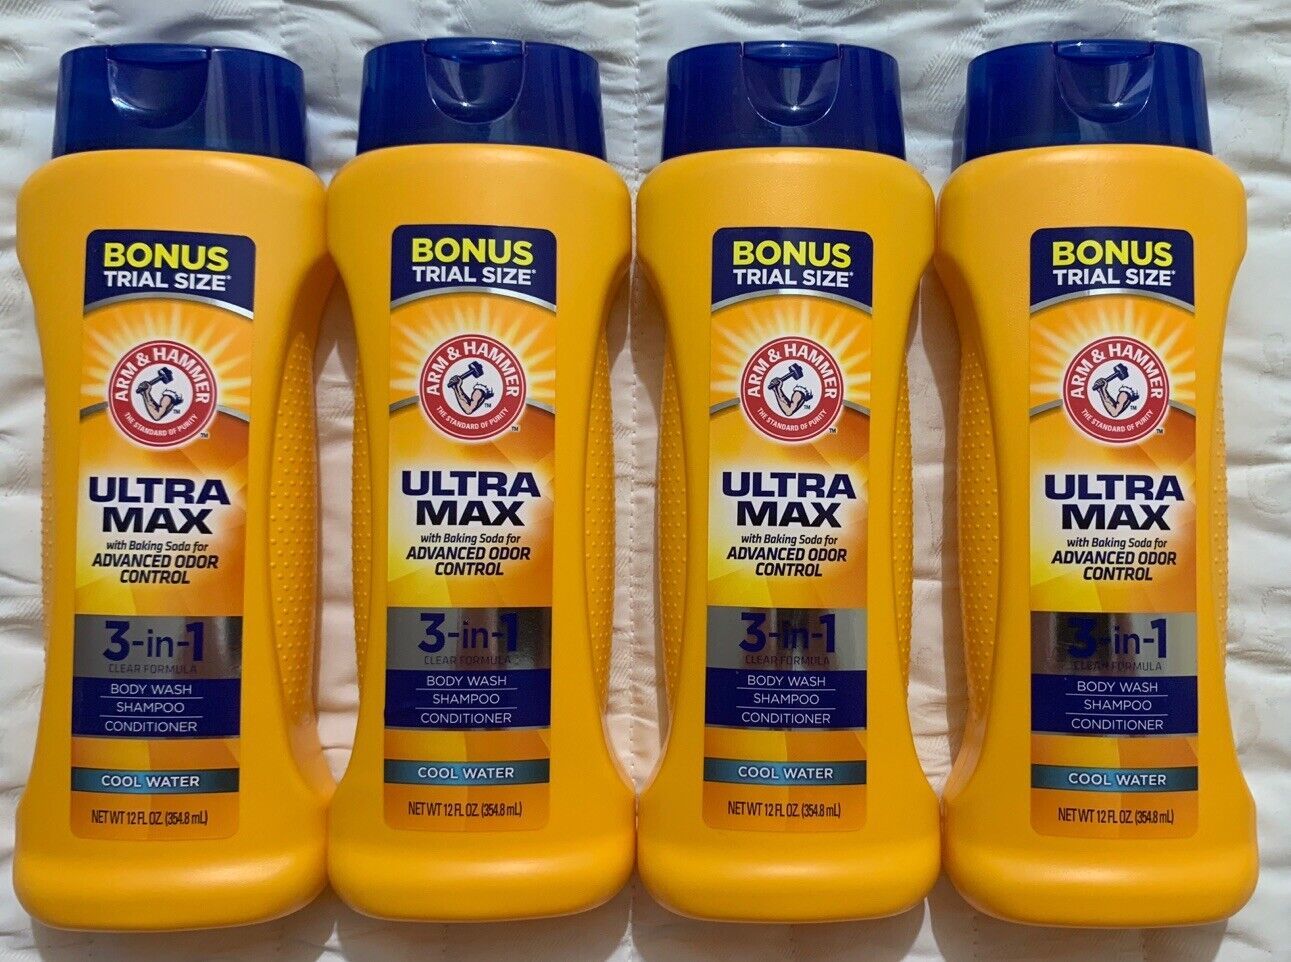 Primary image for 4x Arm & Hammer Ultra Max 3-in-1 Body Wash Shampoo Conditioner Cool Water 12 oz